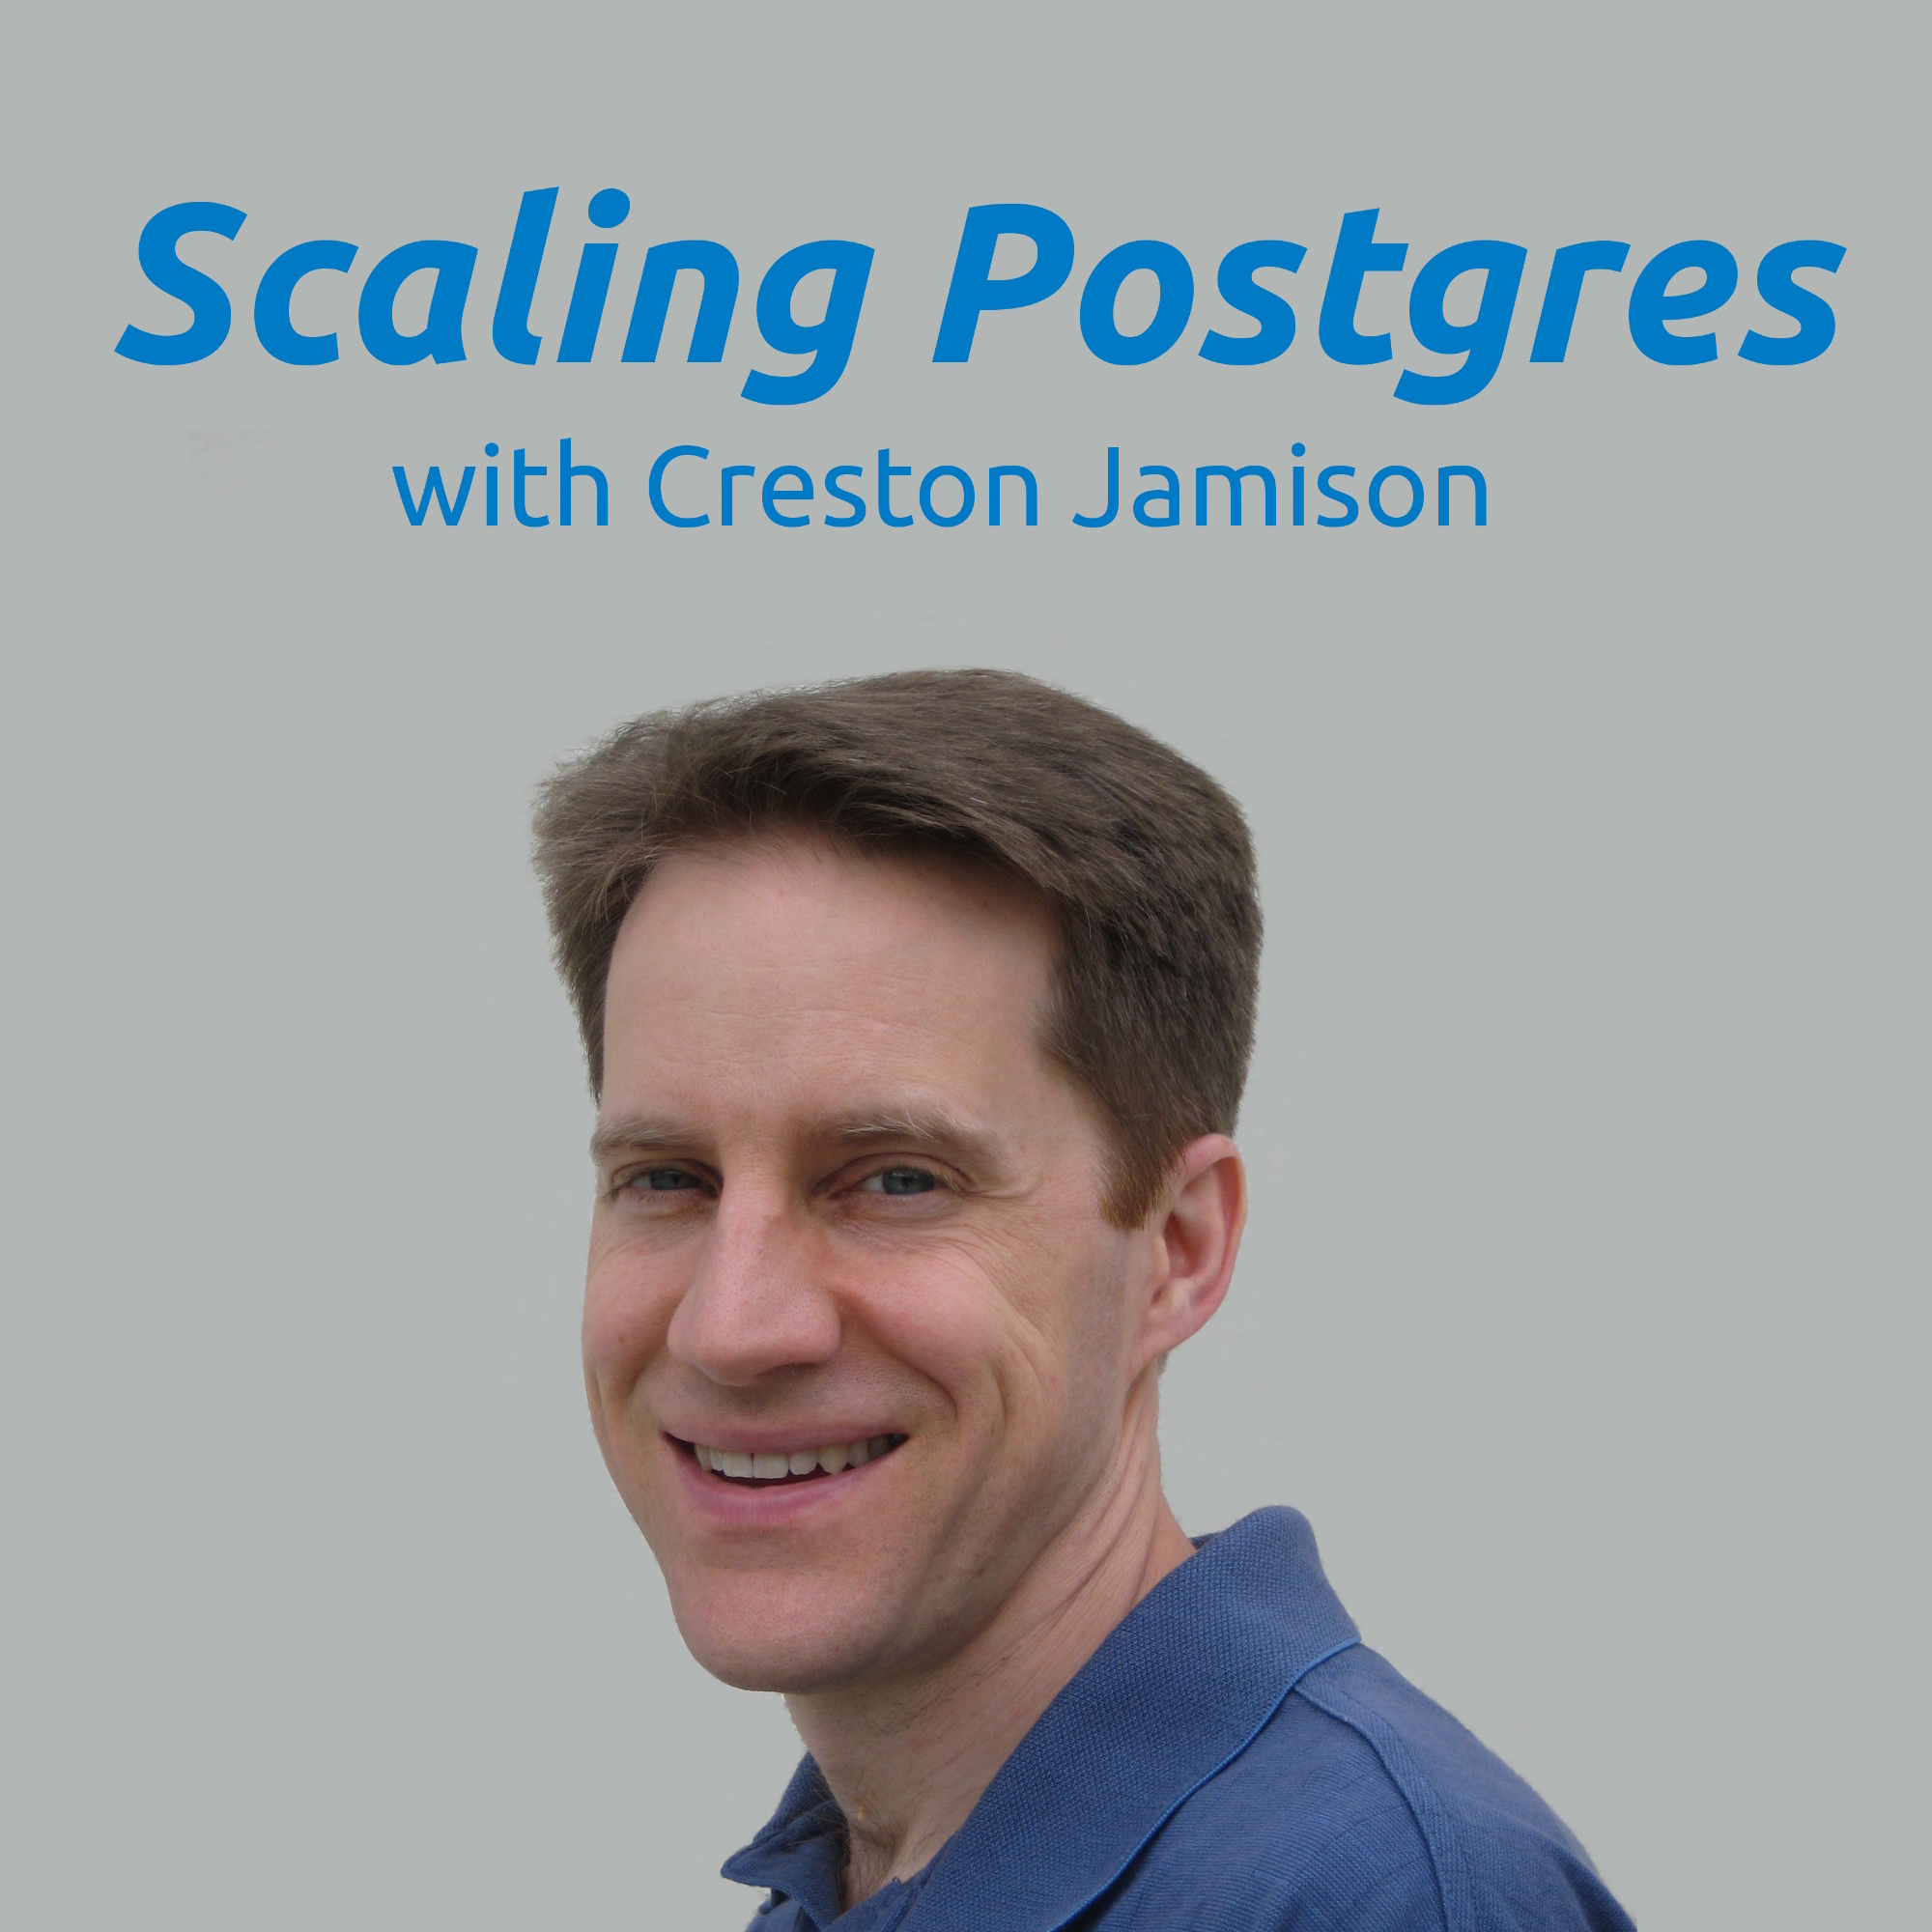 Aurora vs. Postgres, Surprising Transactions, Write-Only & Read-Only, Indexing Advice | Scaling Postgres 195